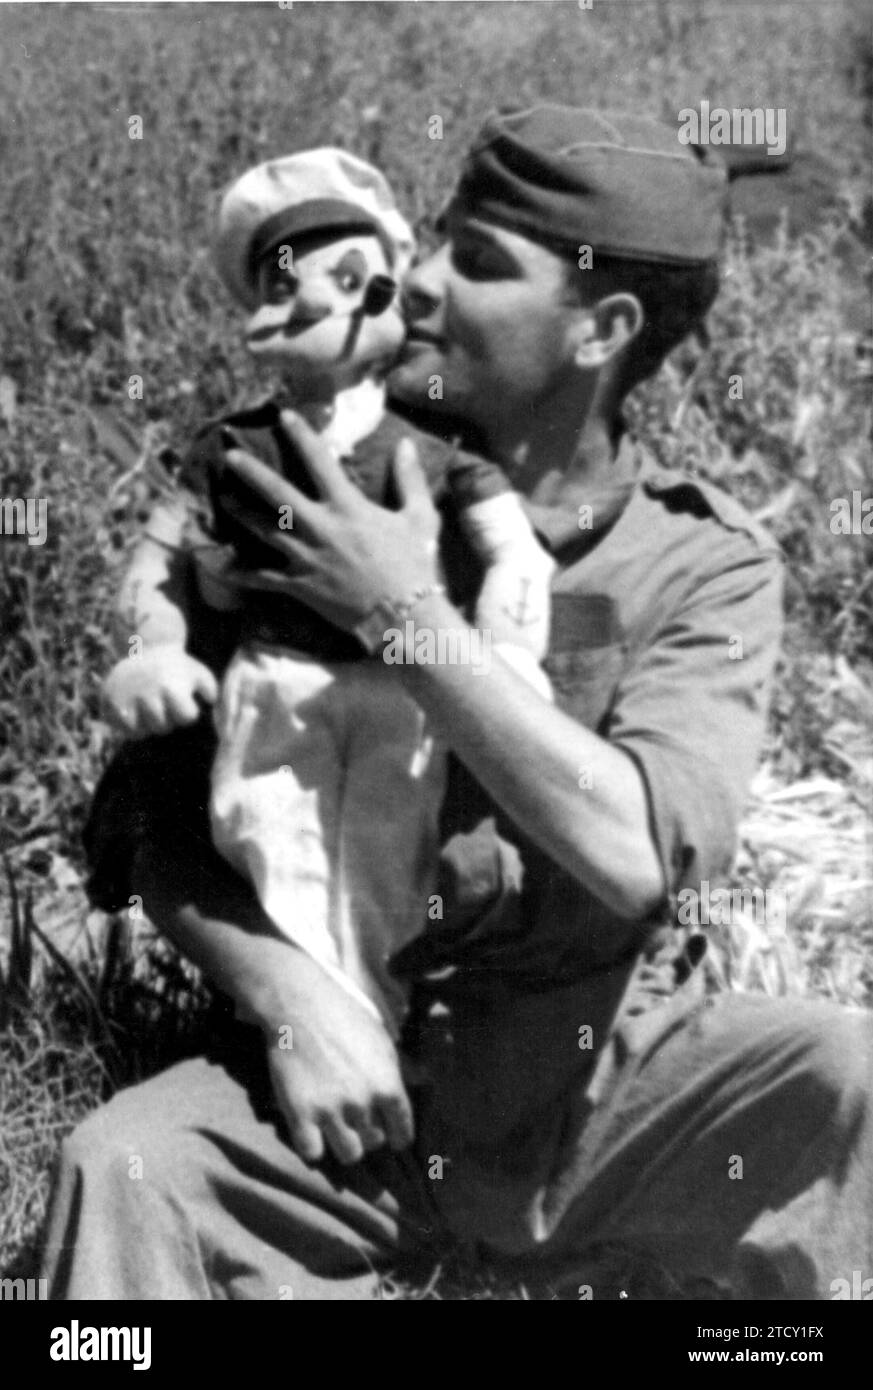 04/30/1937. A popular army soldier with a Popeye doll as a Mascot. Credit: Album / Archivo ABC / José Díaz Casariego Stock Photo